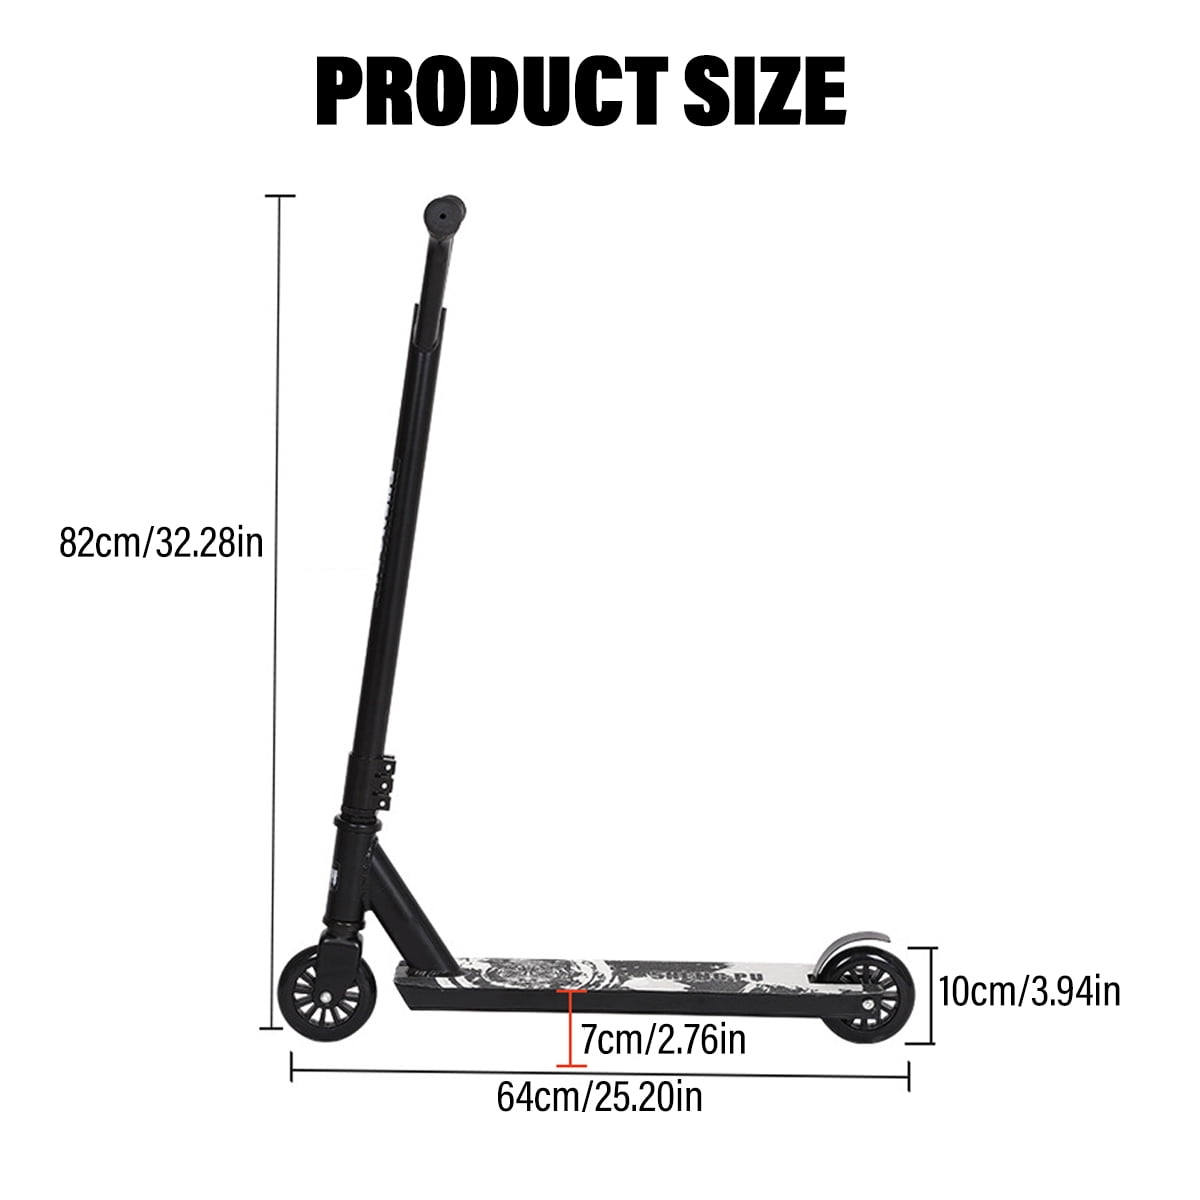 Tricks Scooter for Boys & Girls Best Entry Level Freestyle Scooter with Stable Performance SHENGPU Stunt Scooter for Adults/Teens/Kids Ages 8+ Featuring ABEC-9 Wheel Bearings 